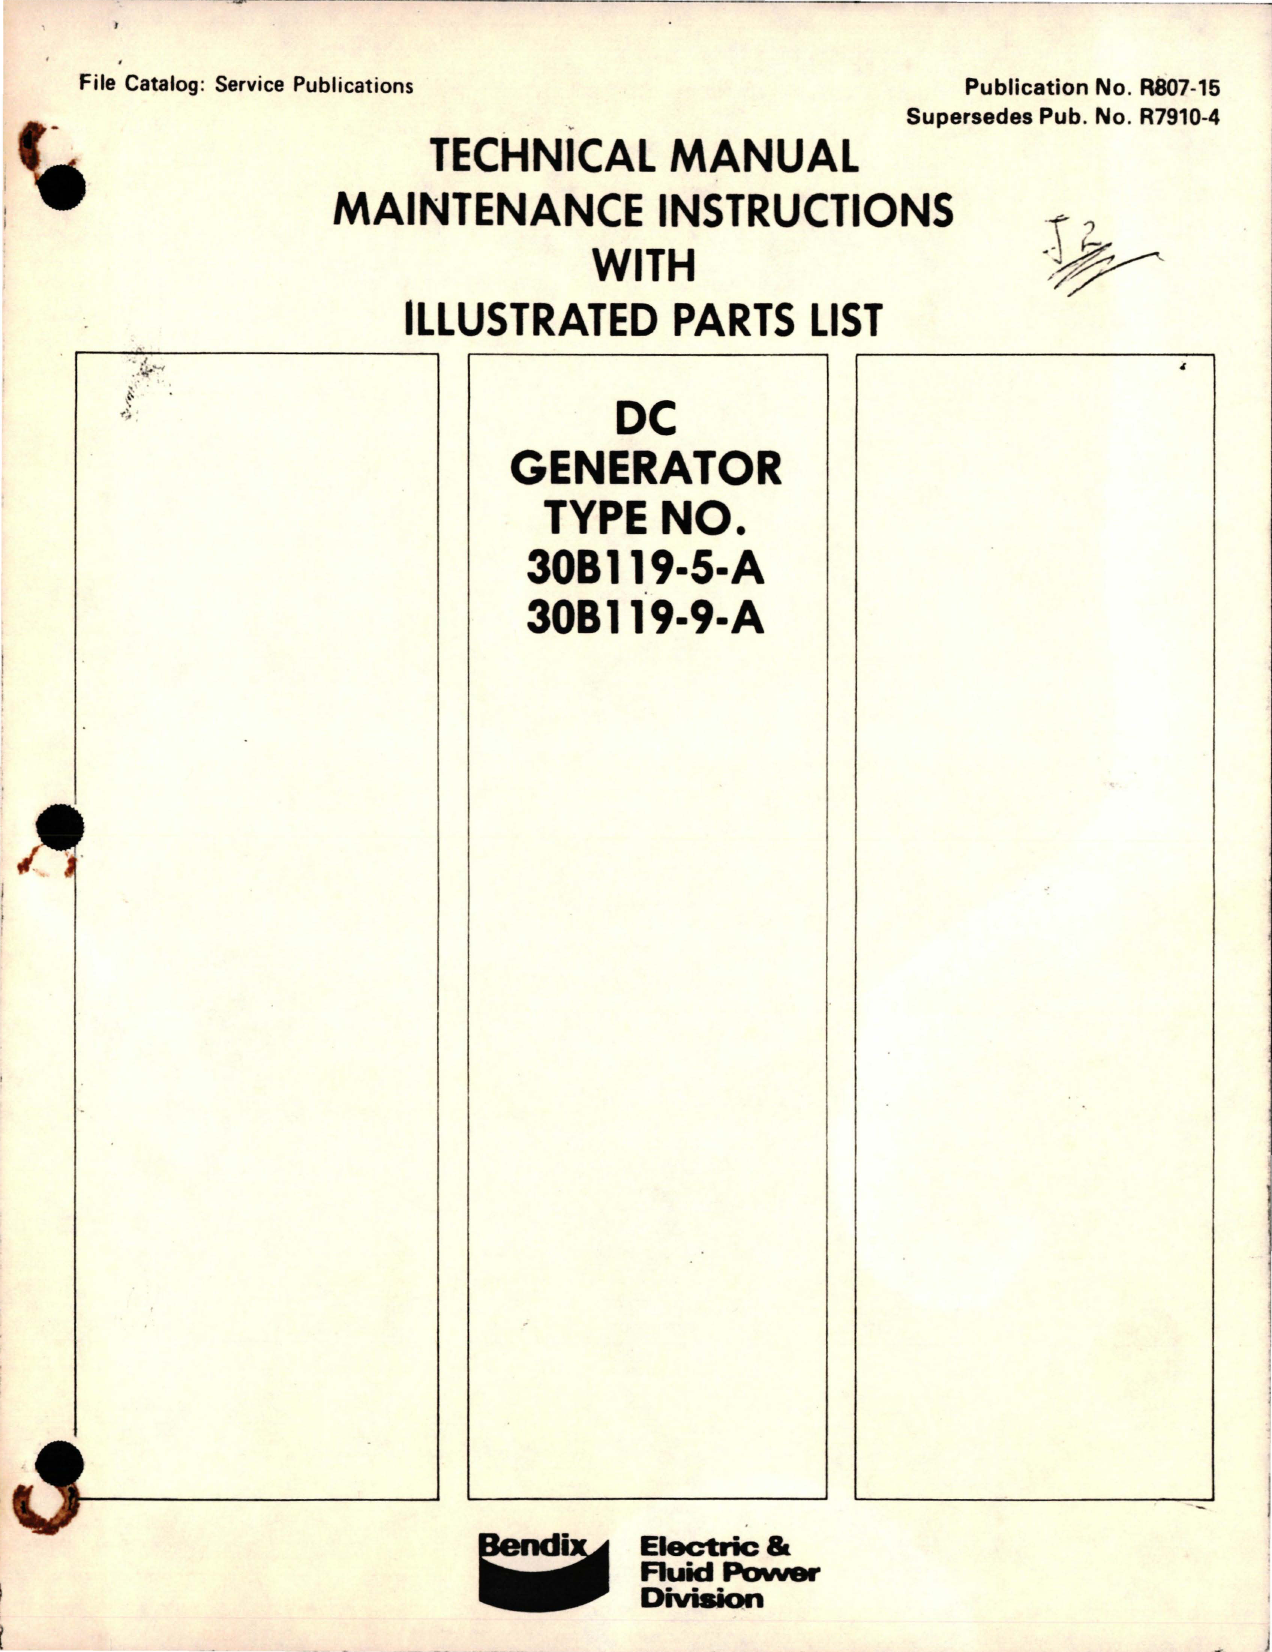 Sample page 1 from AirCorps Library document: Maintenance Instructions with Illustrated Parts List for DC Generator - Type 30B119-5-A and 30B119-9-A